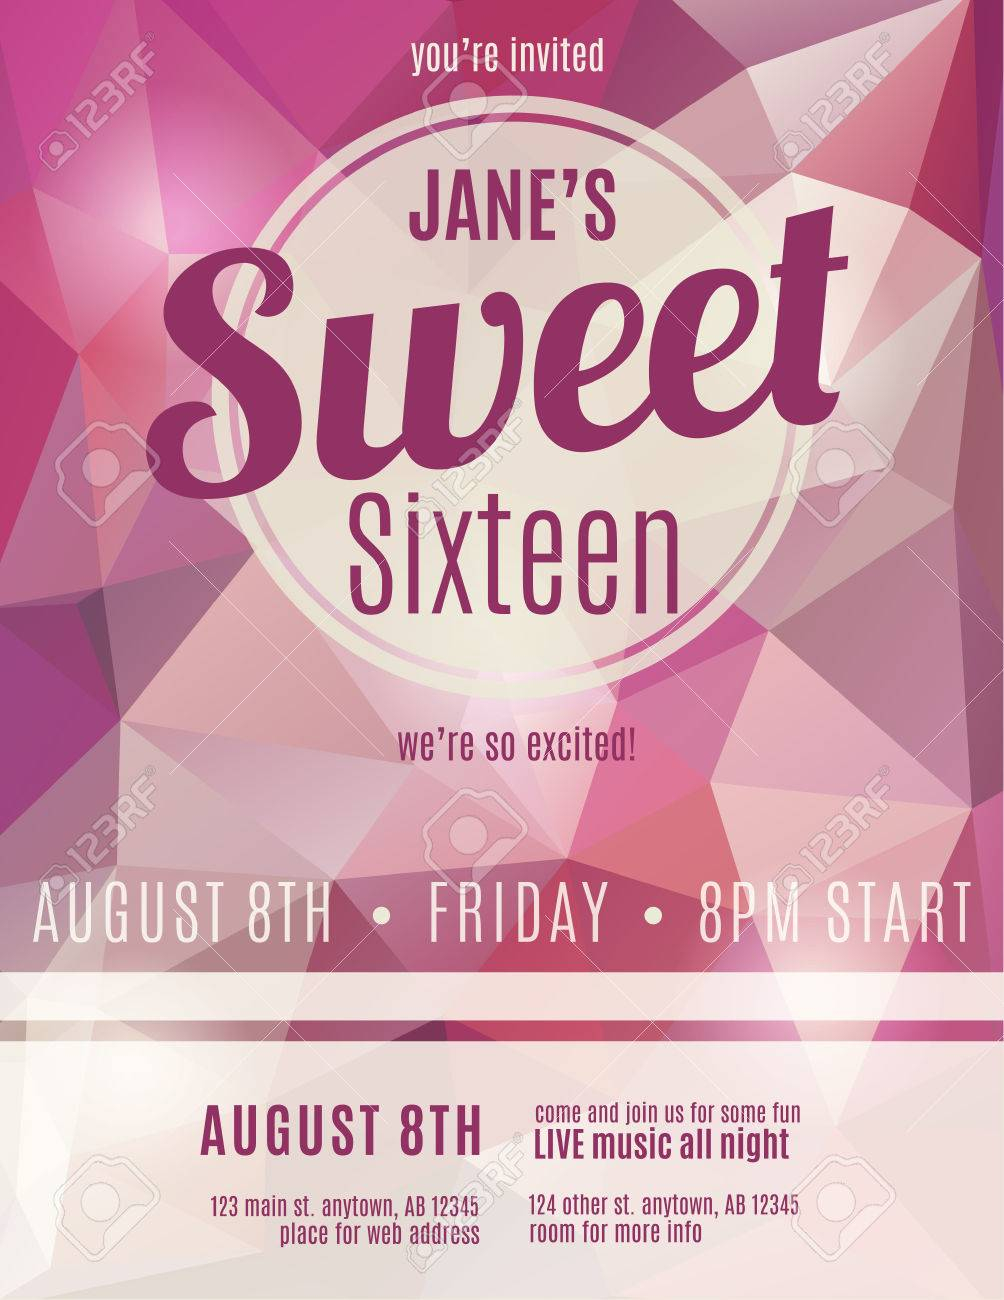 Sweet sixteen party invitation flyer template design Inside Party Invitation Flyer Template With Regard To Party Invitation Flyer Template